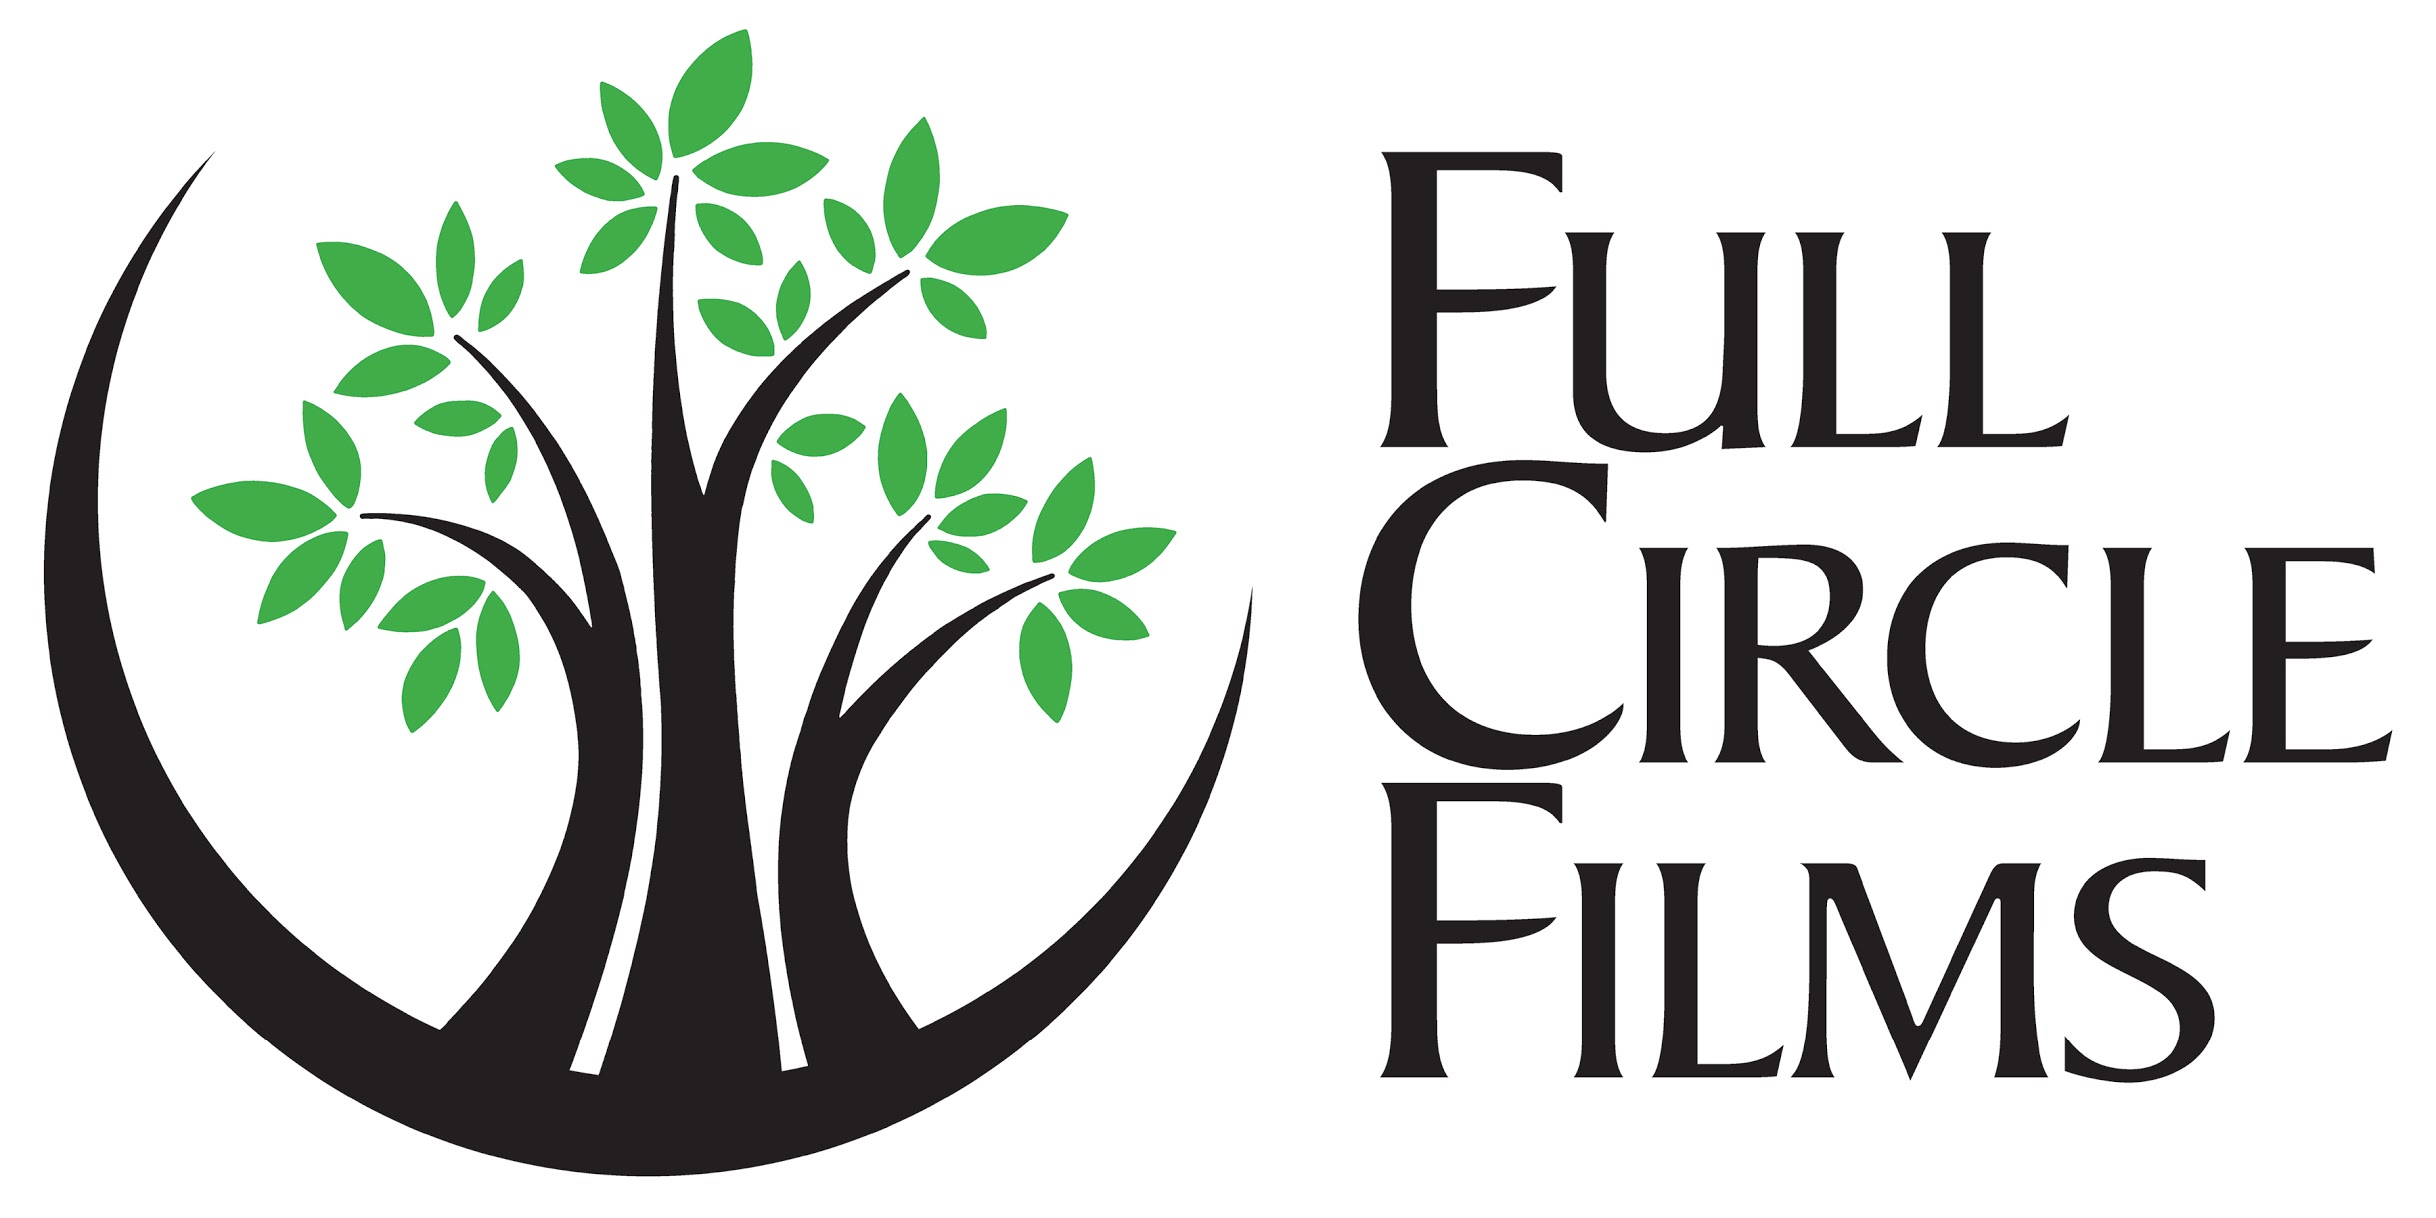 Welcome to Full Circle Films!